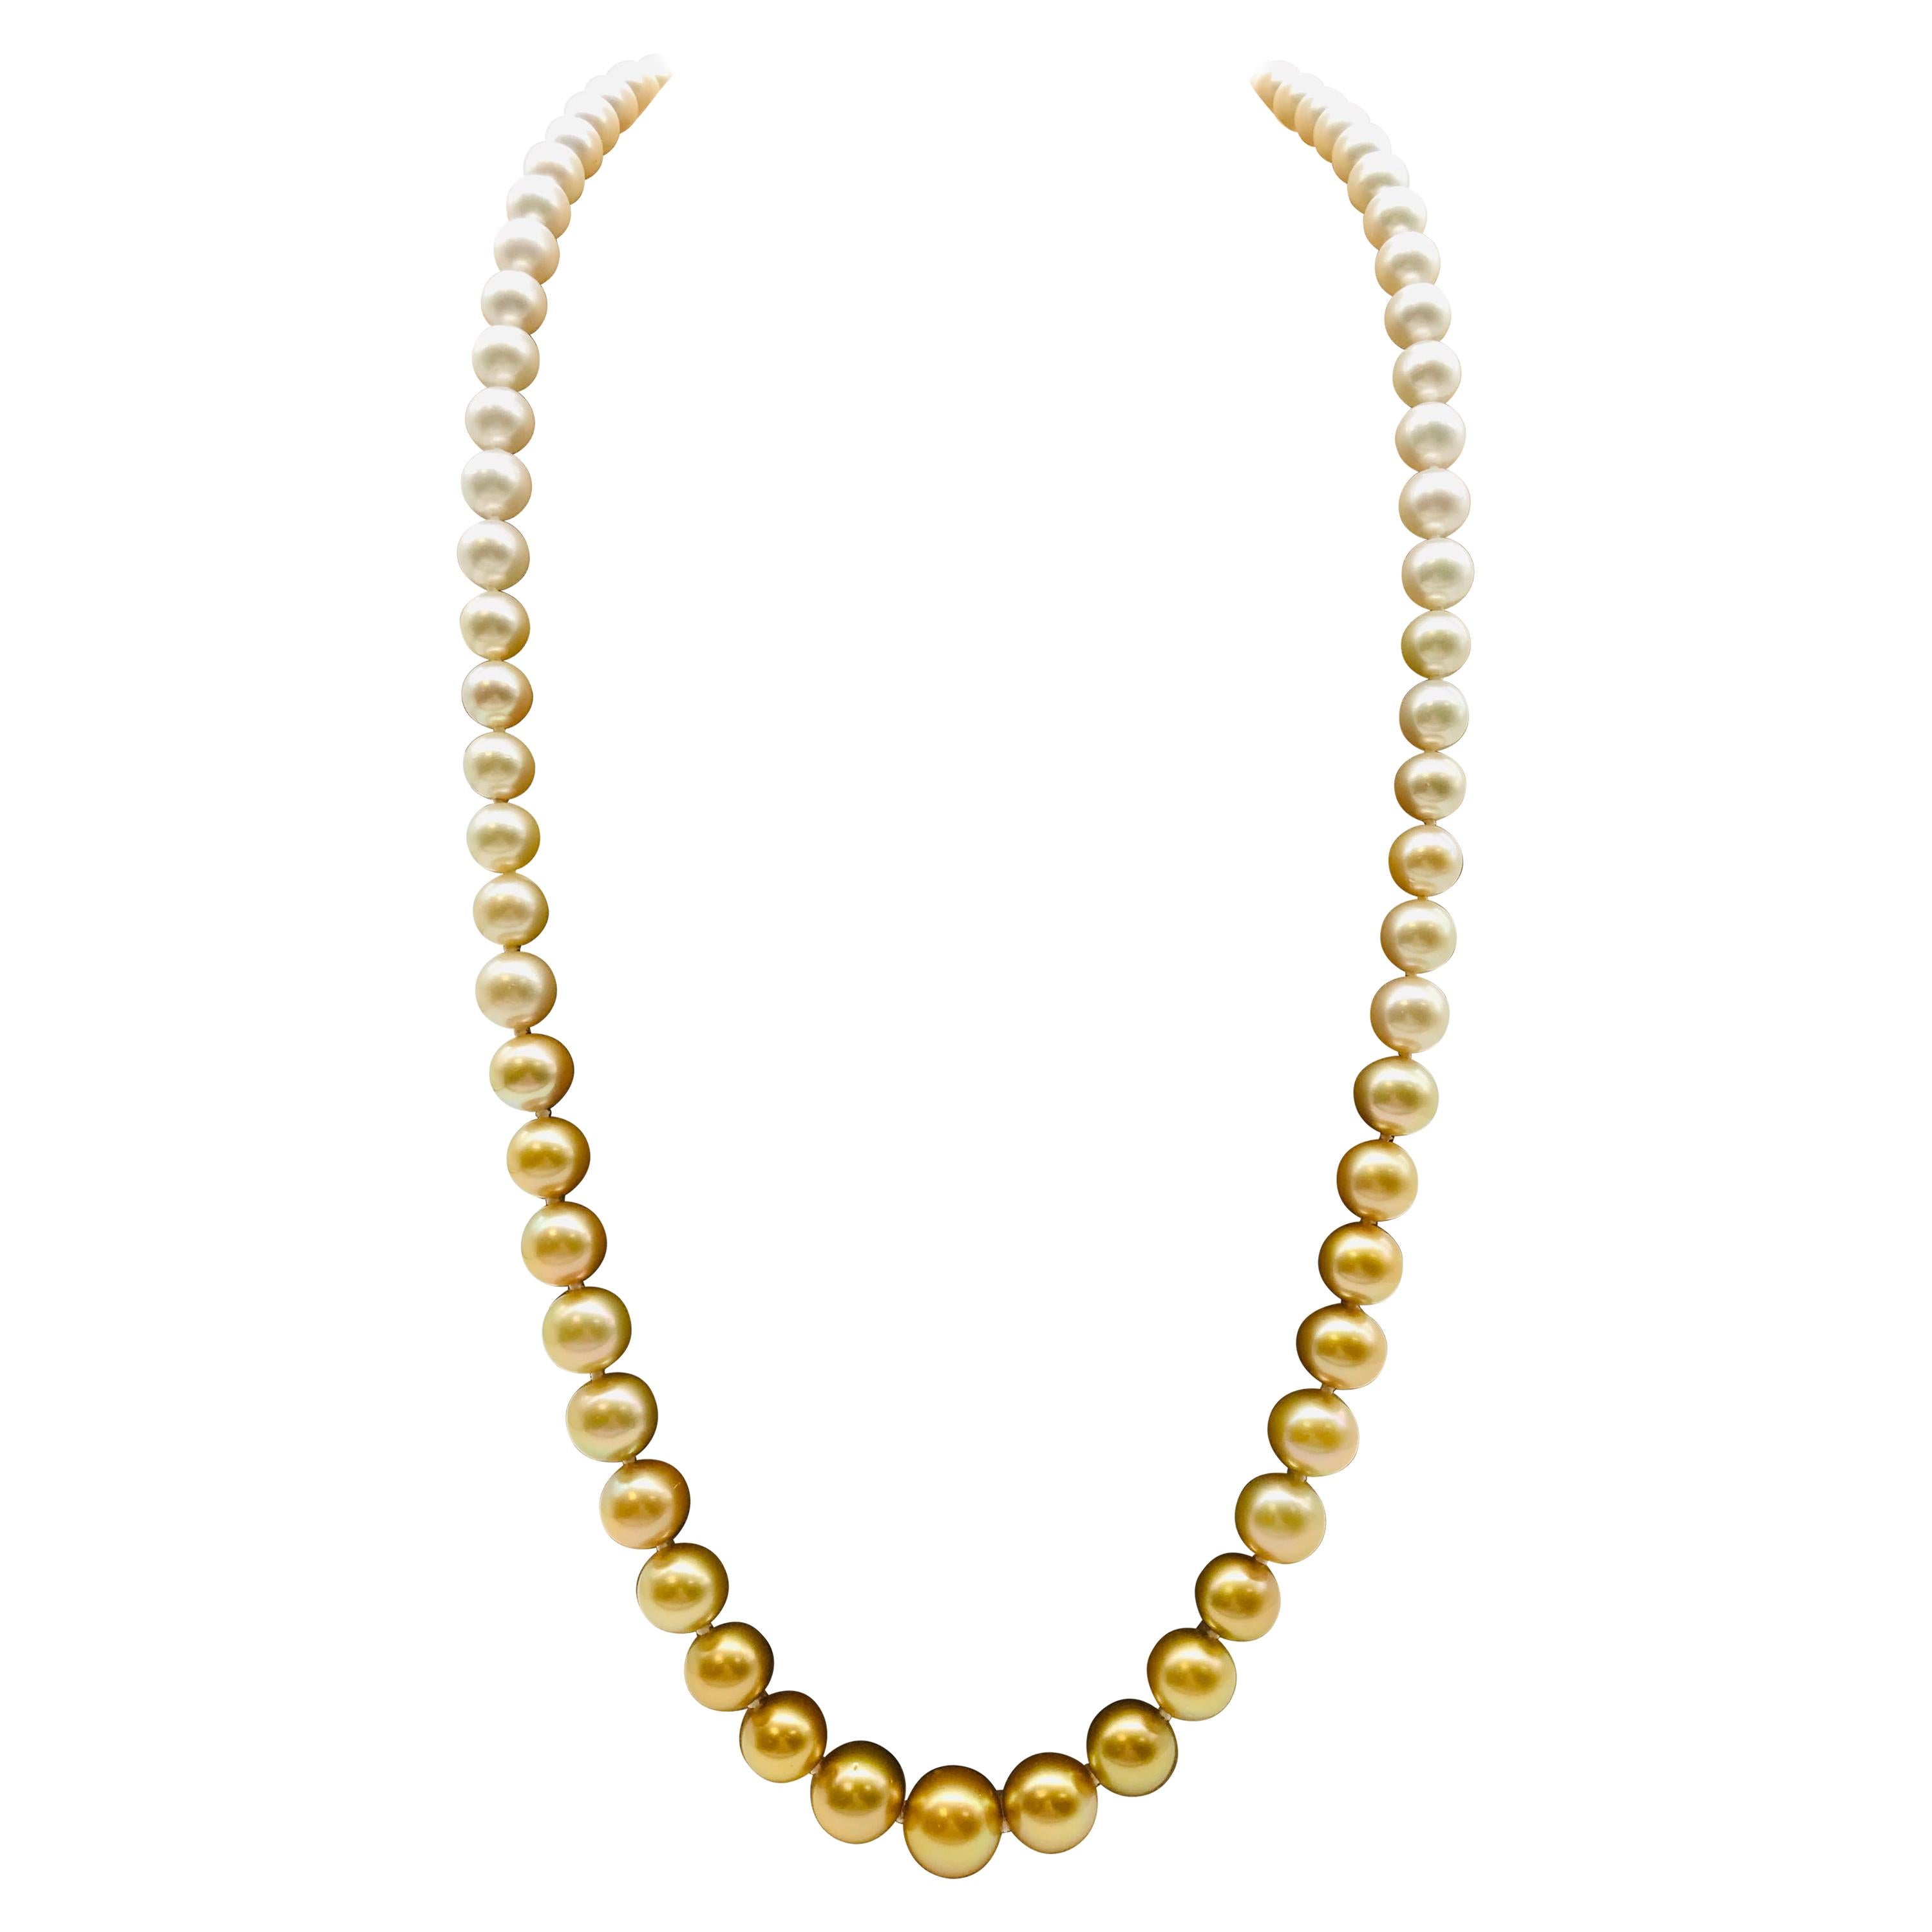  Long pearl necklace from white to gold color